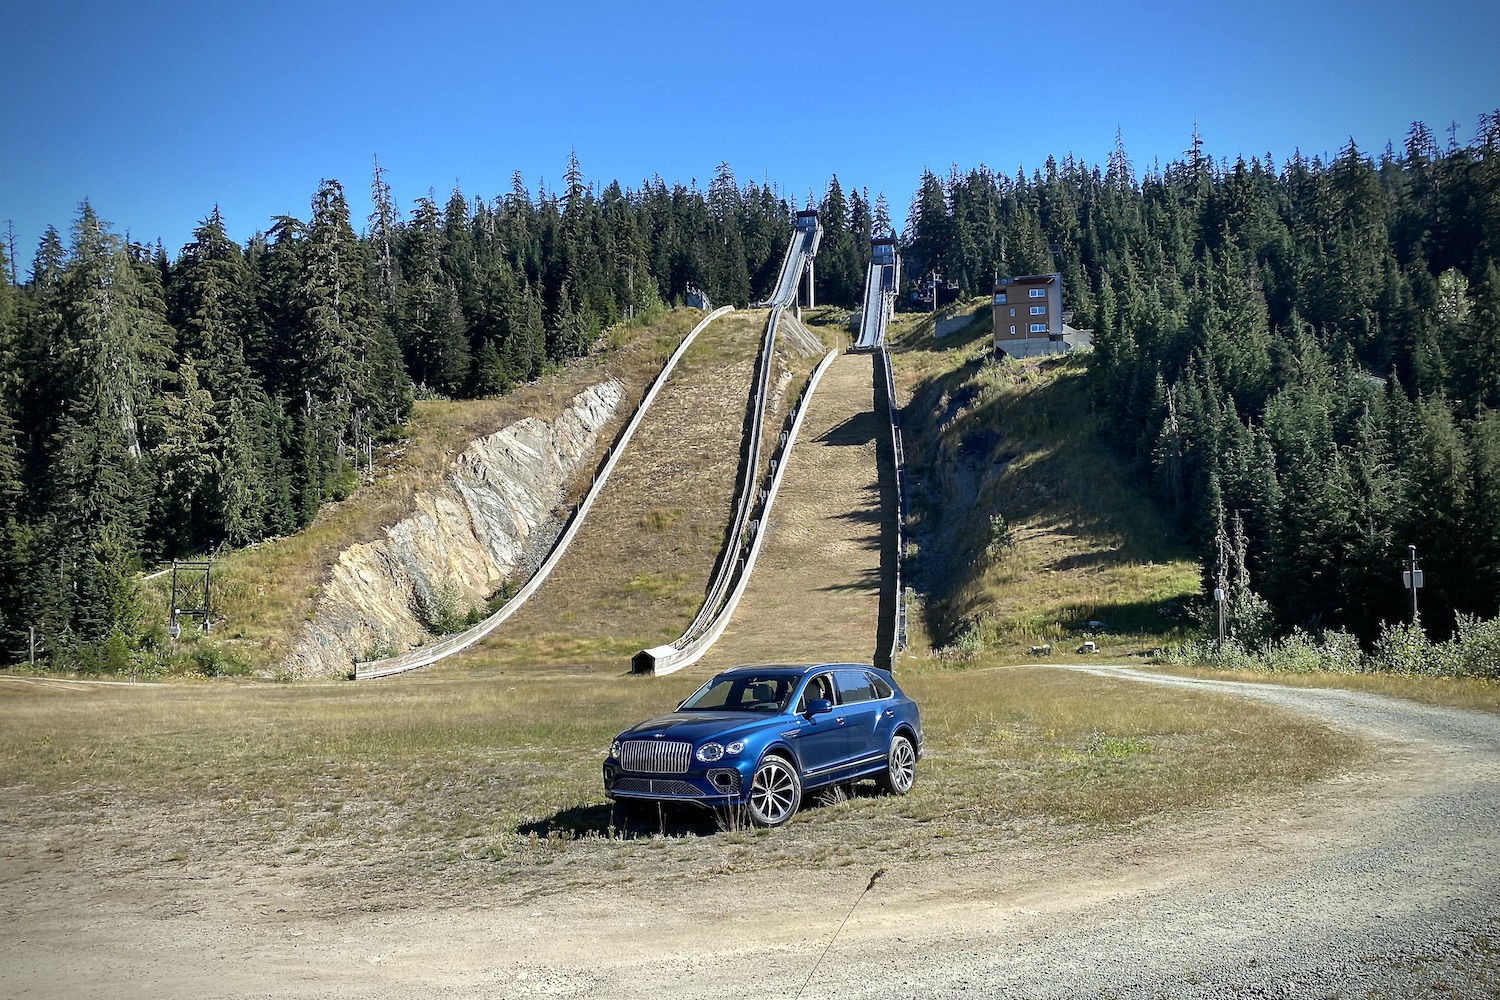 Front end angle of 2023 Bentley Bentayga EWB from driver's side in front of ski jump at Whistler Mountain.